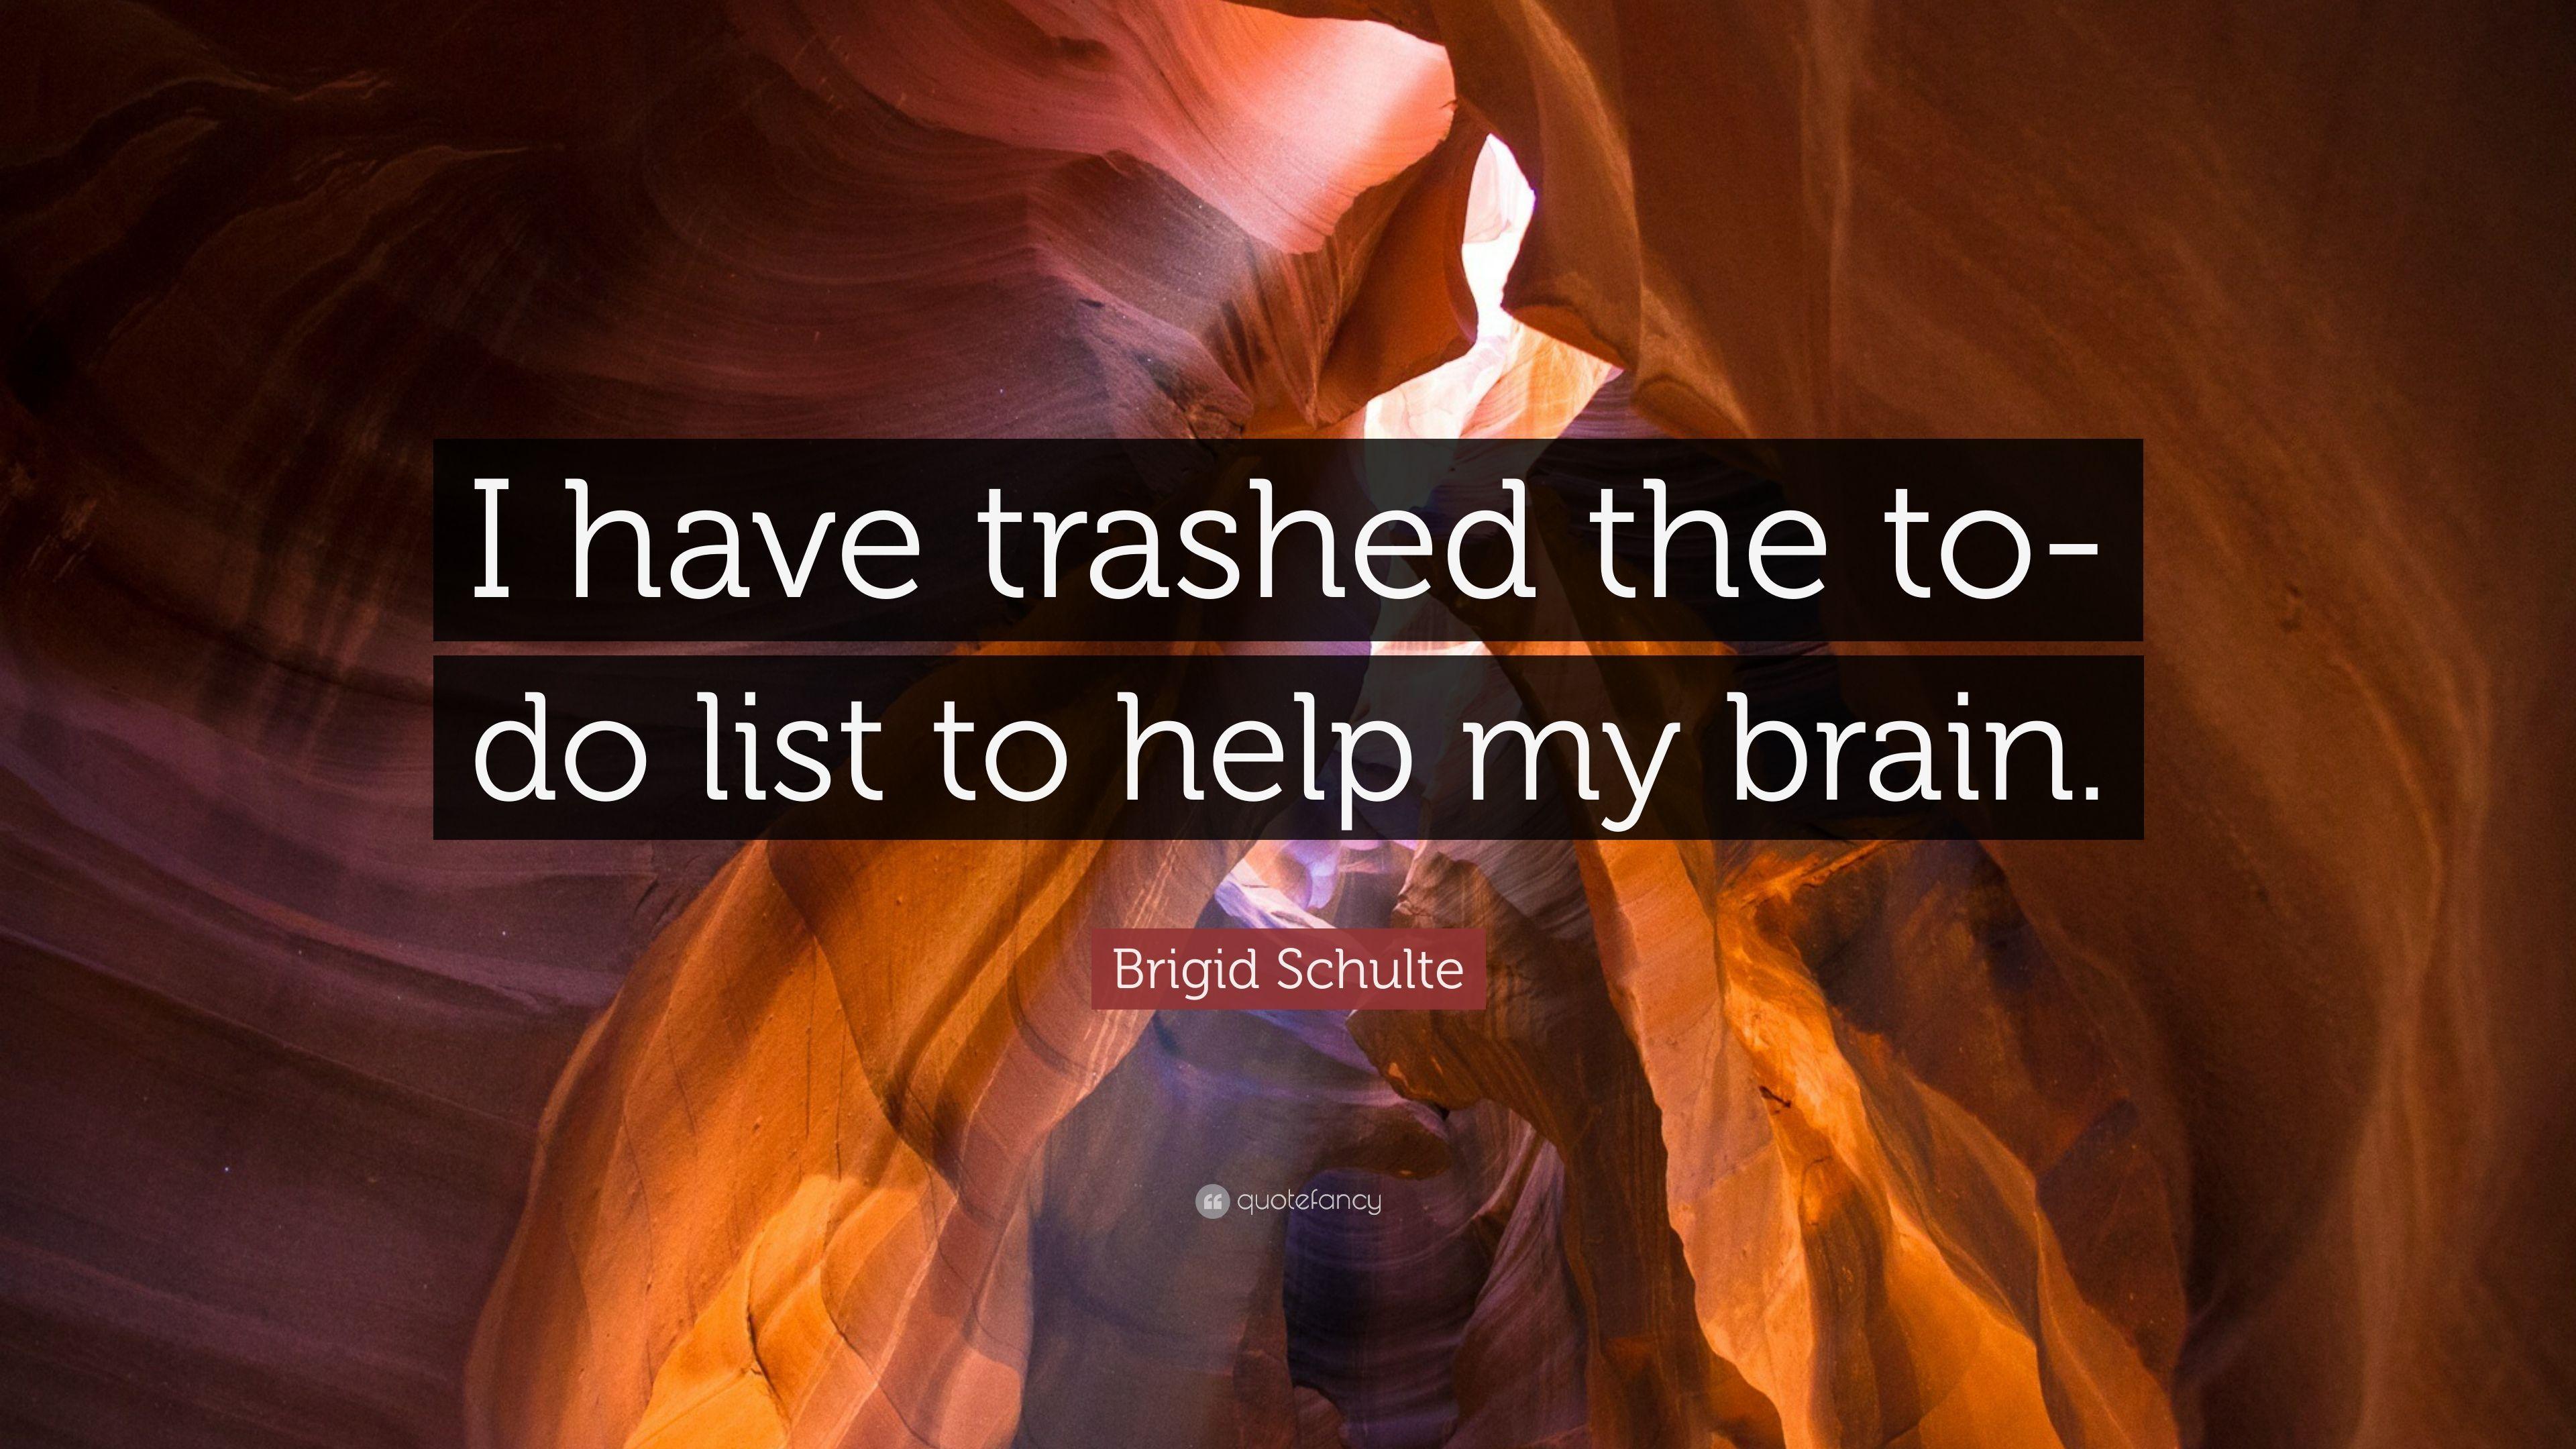 Brigid Schulte Quote: “I Have Trashed The To Do List To Help My